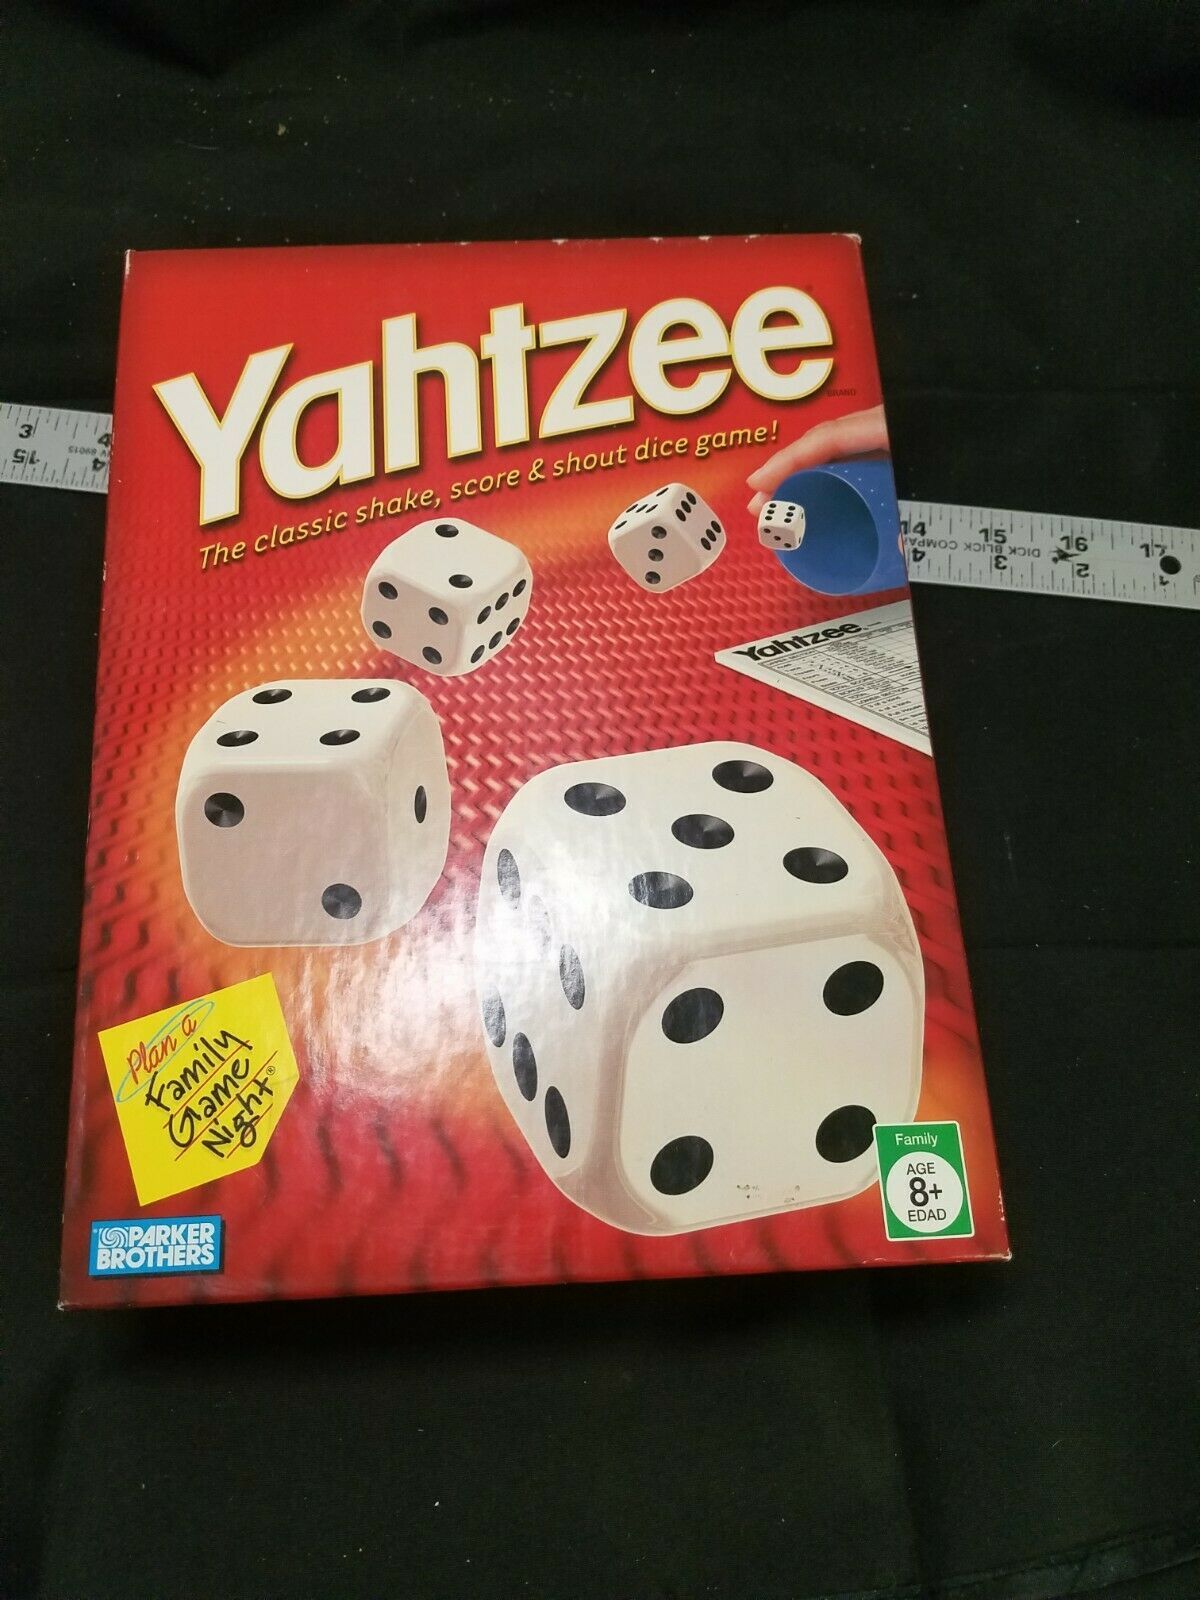 Primary image for Yahtzee™ Yatzee Dice Game By Hasbro, Family Fun.